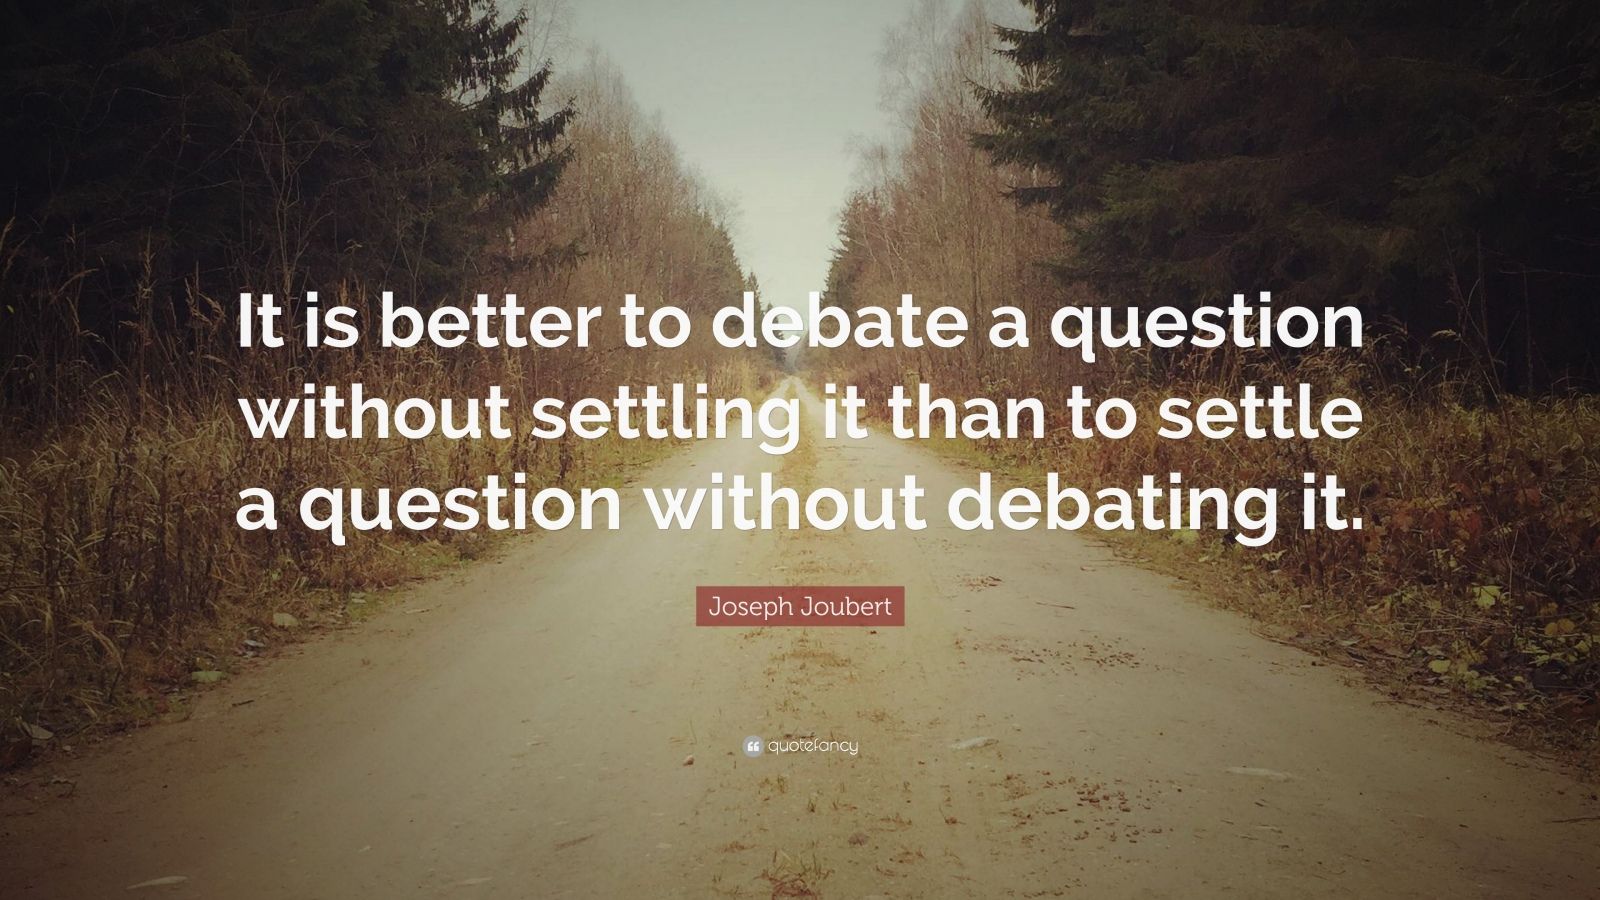 Joseph Joubert Quote “It is better to debate a question without